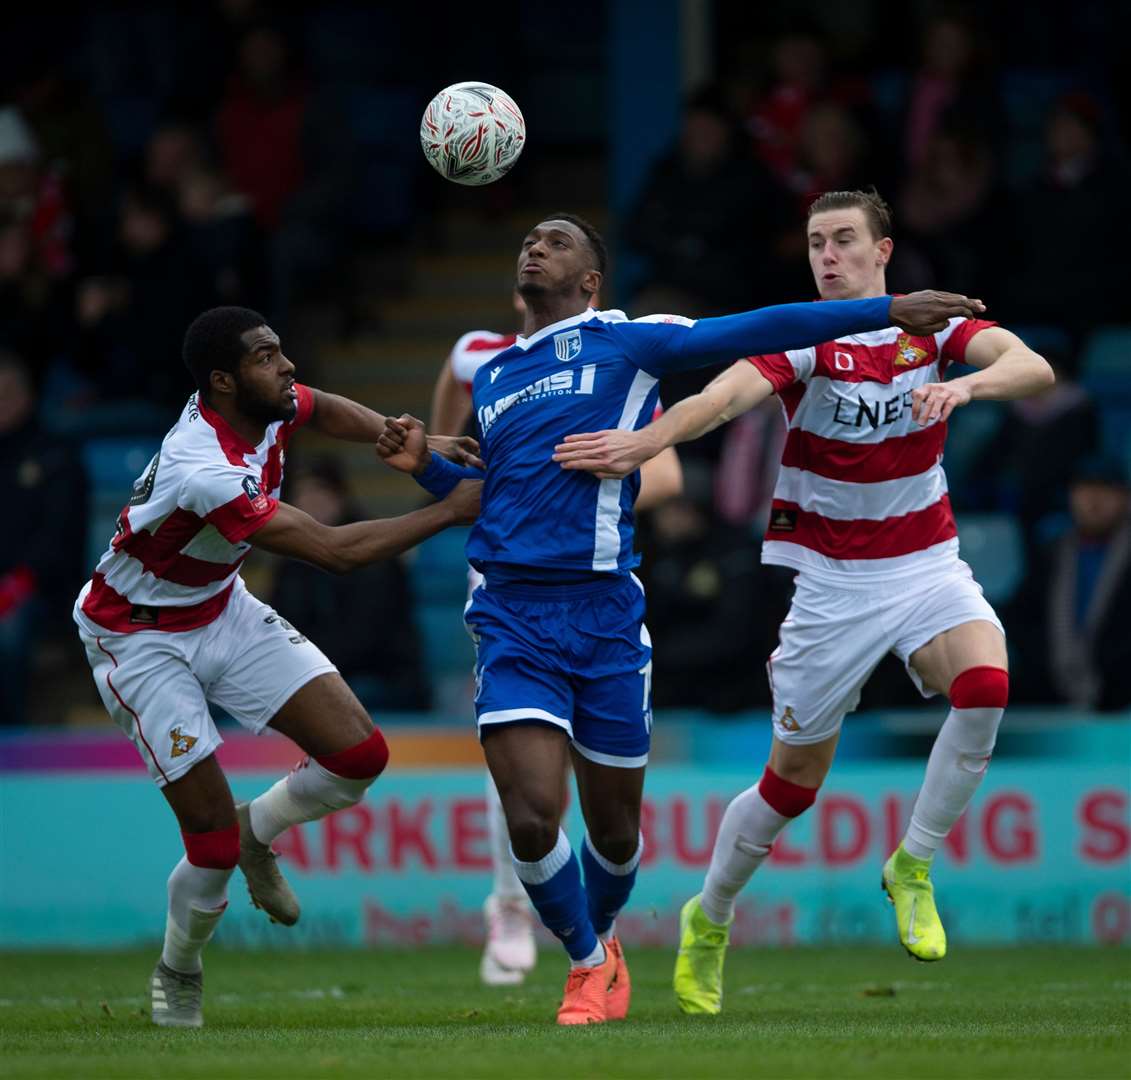 Brandon Hanlan causing problems for the Doncaster defence Picture: Ady Kerry